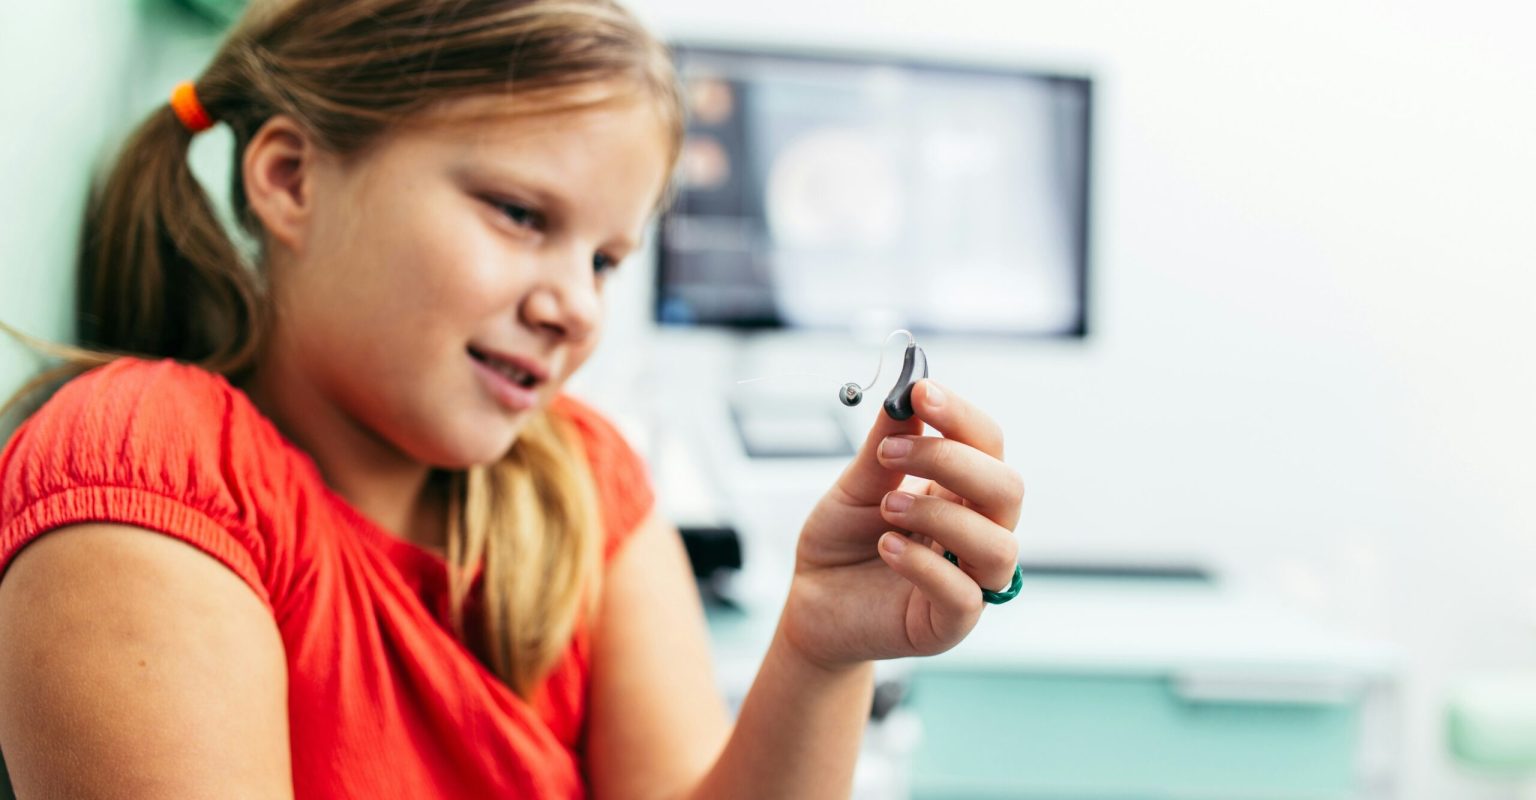 A young girl looks at her hearing aid with a look of fascination on her face. She's white with dark blonde hair which is tied back in pigtails and she's wearing a bright red tshirt.